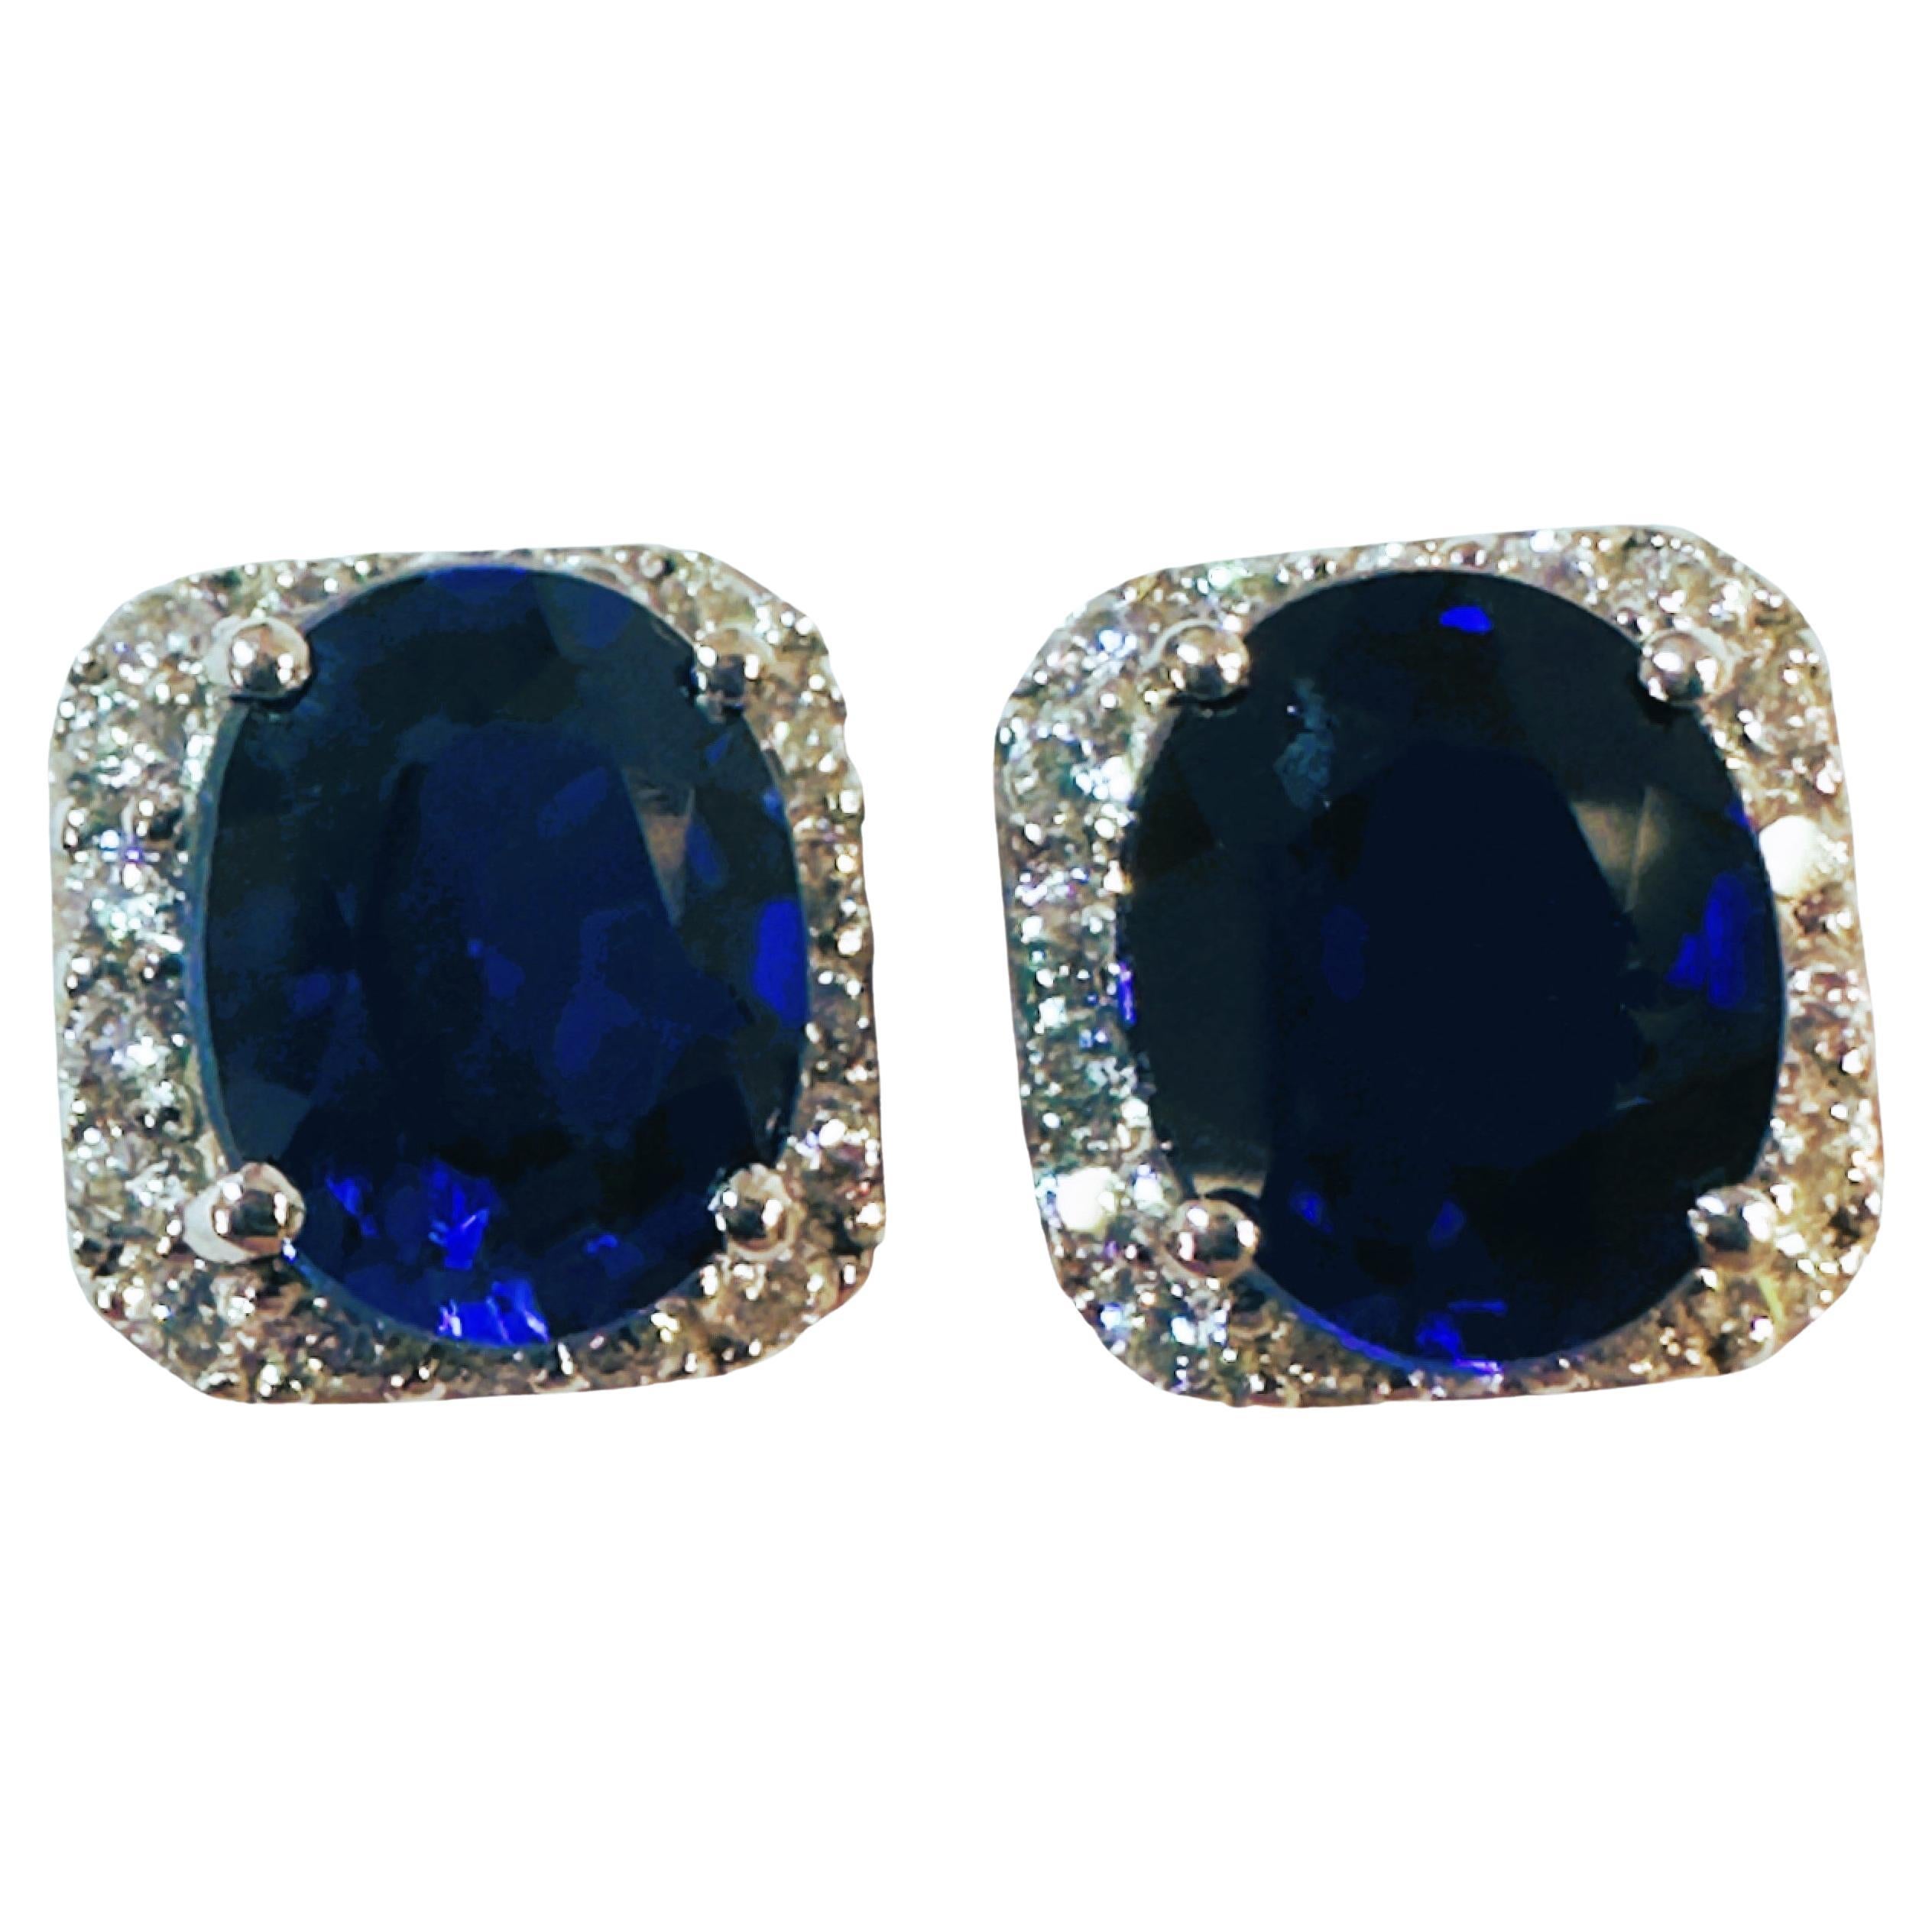 New African 4.10 ct Deep Blue Sapphire Sterling Post Earrings